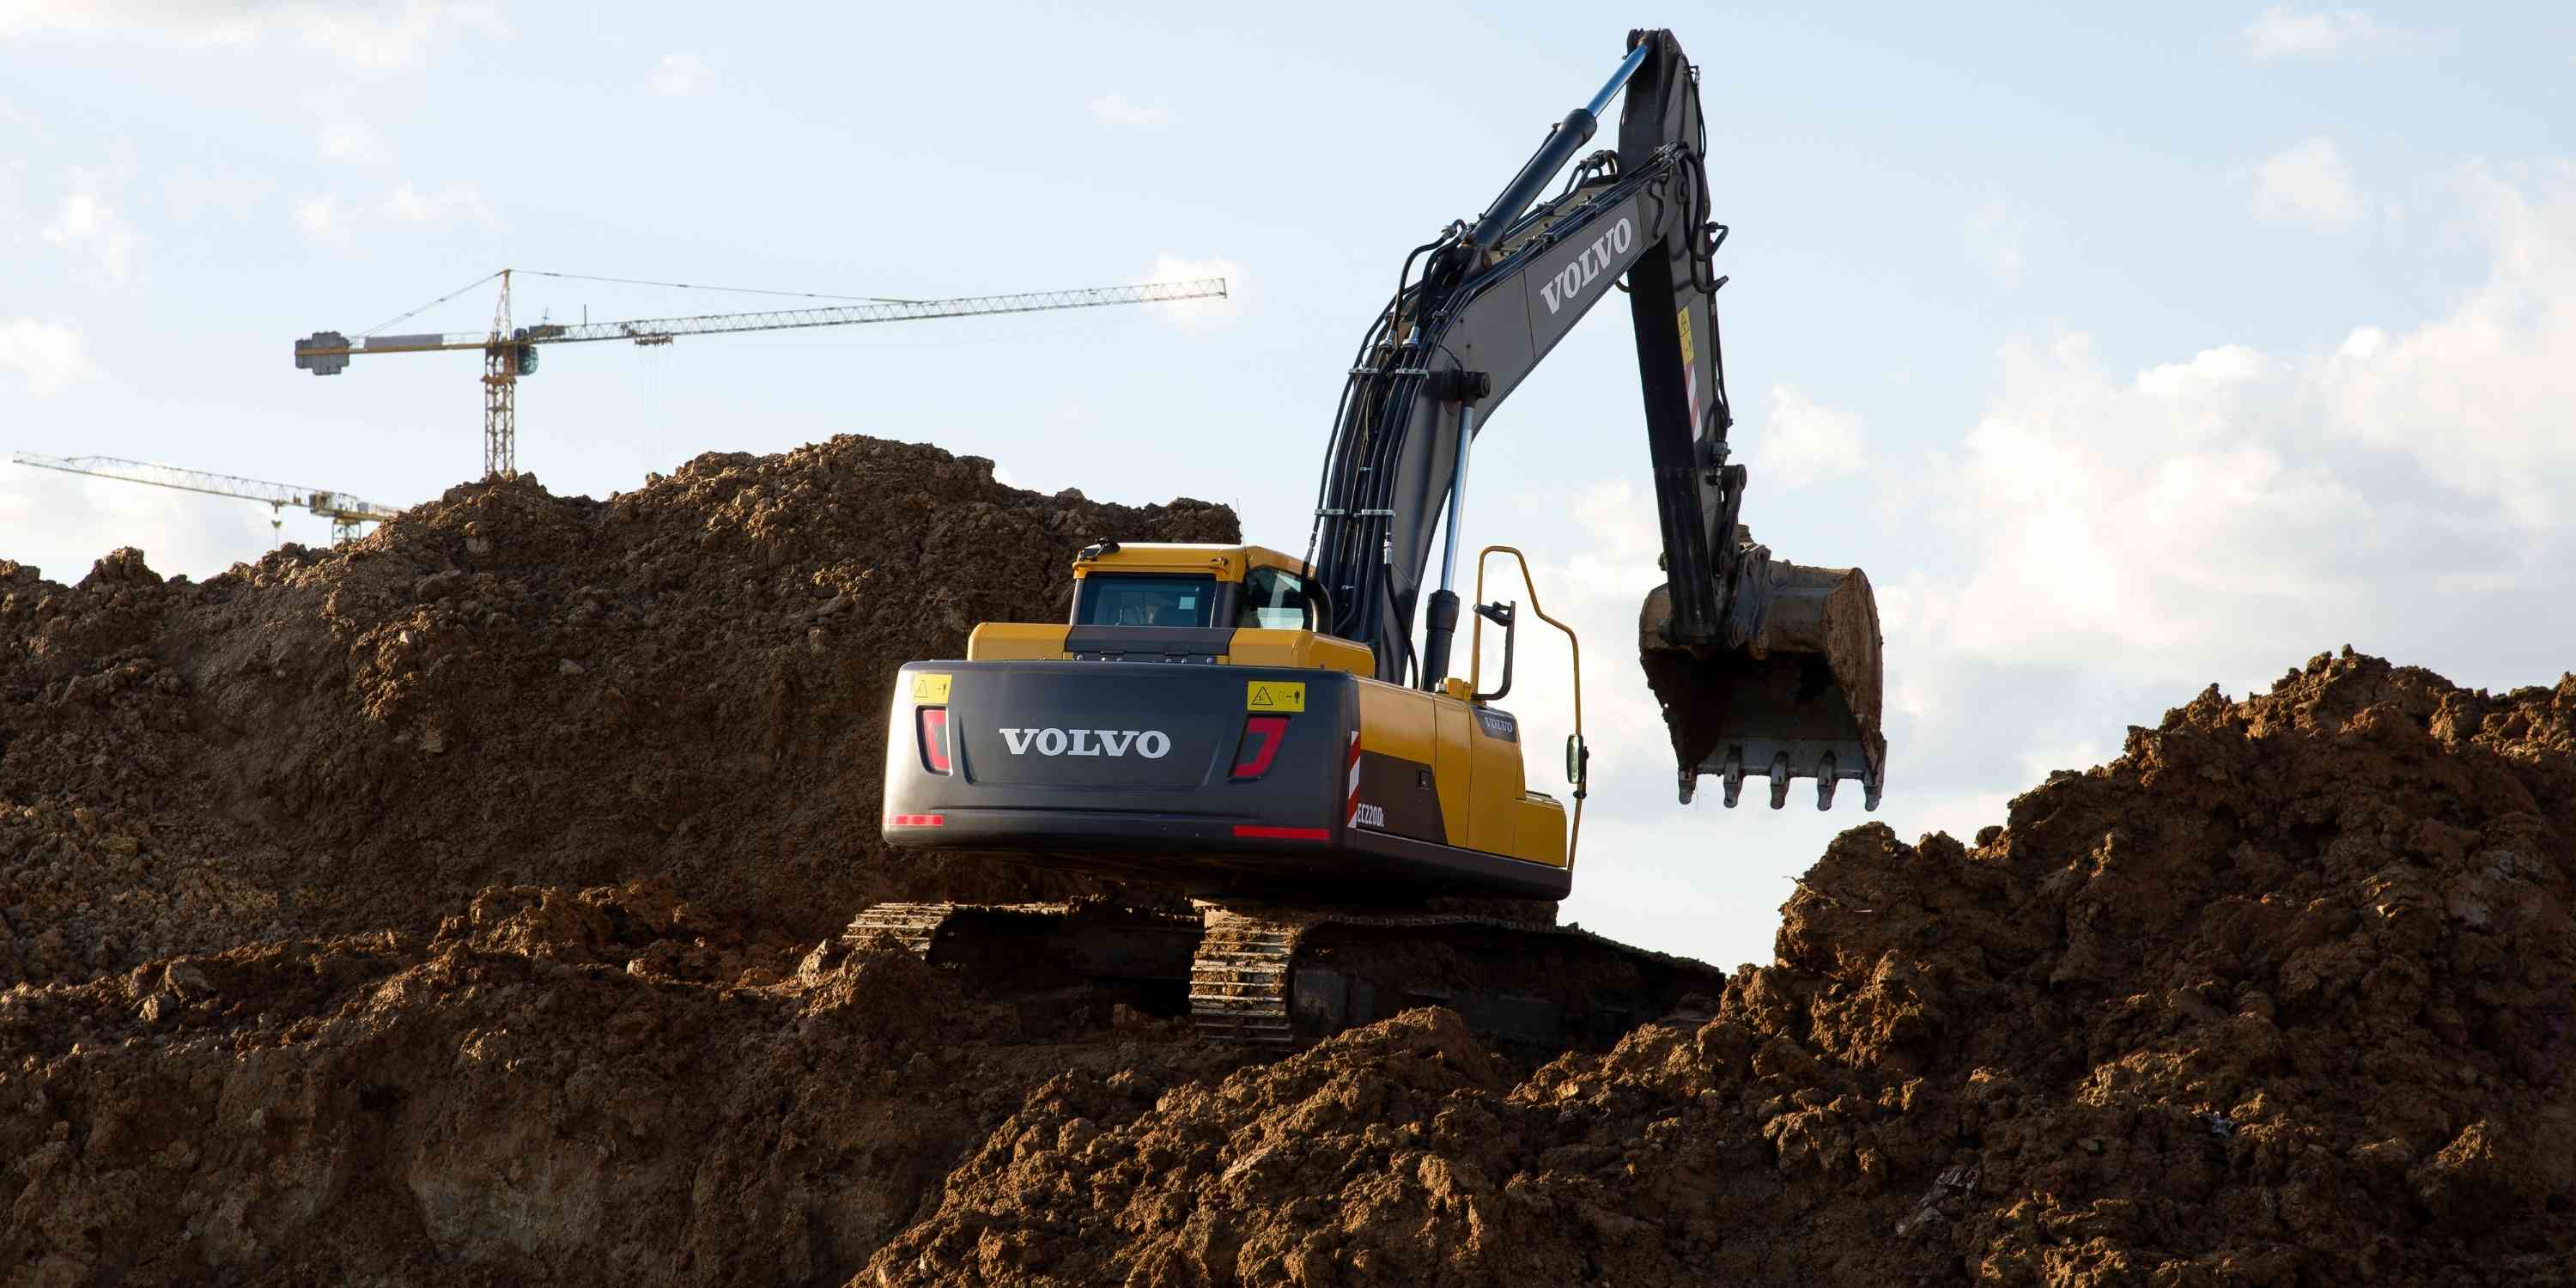 Construction machine digging dirt with Volvo brand label